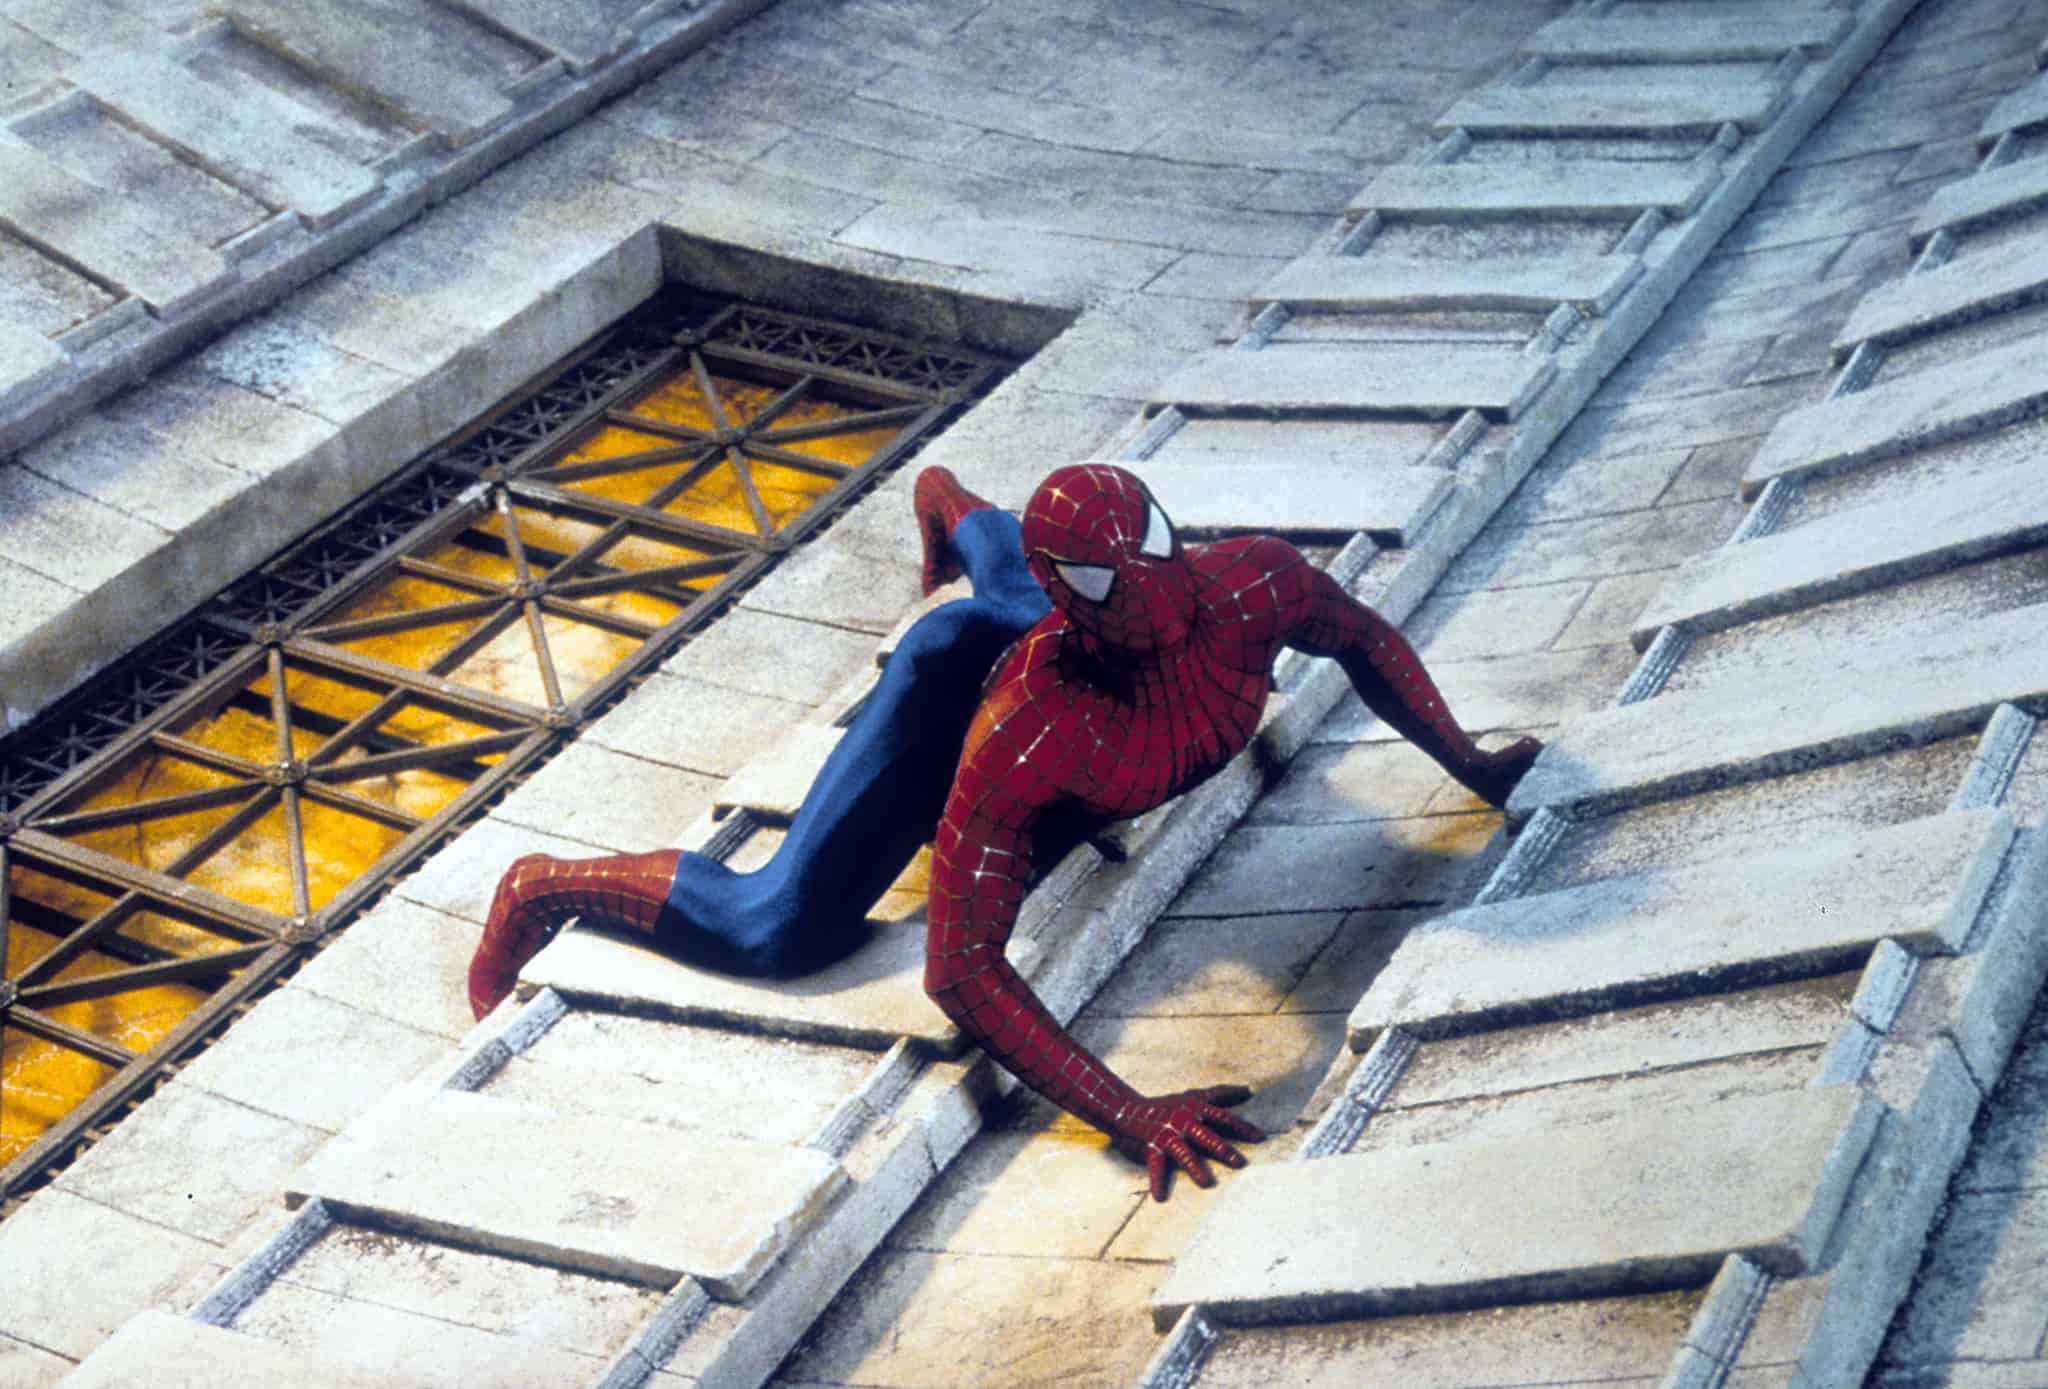 Spider-Man scales a building in this image from Columbia Pictures